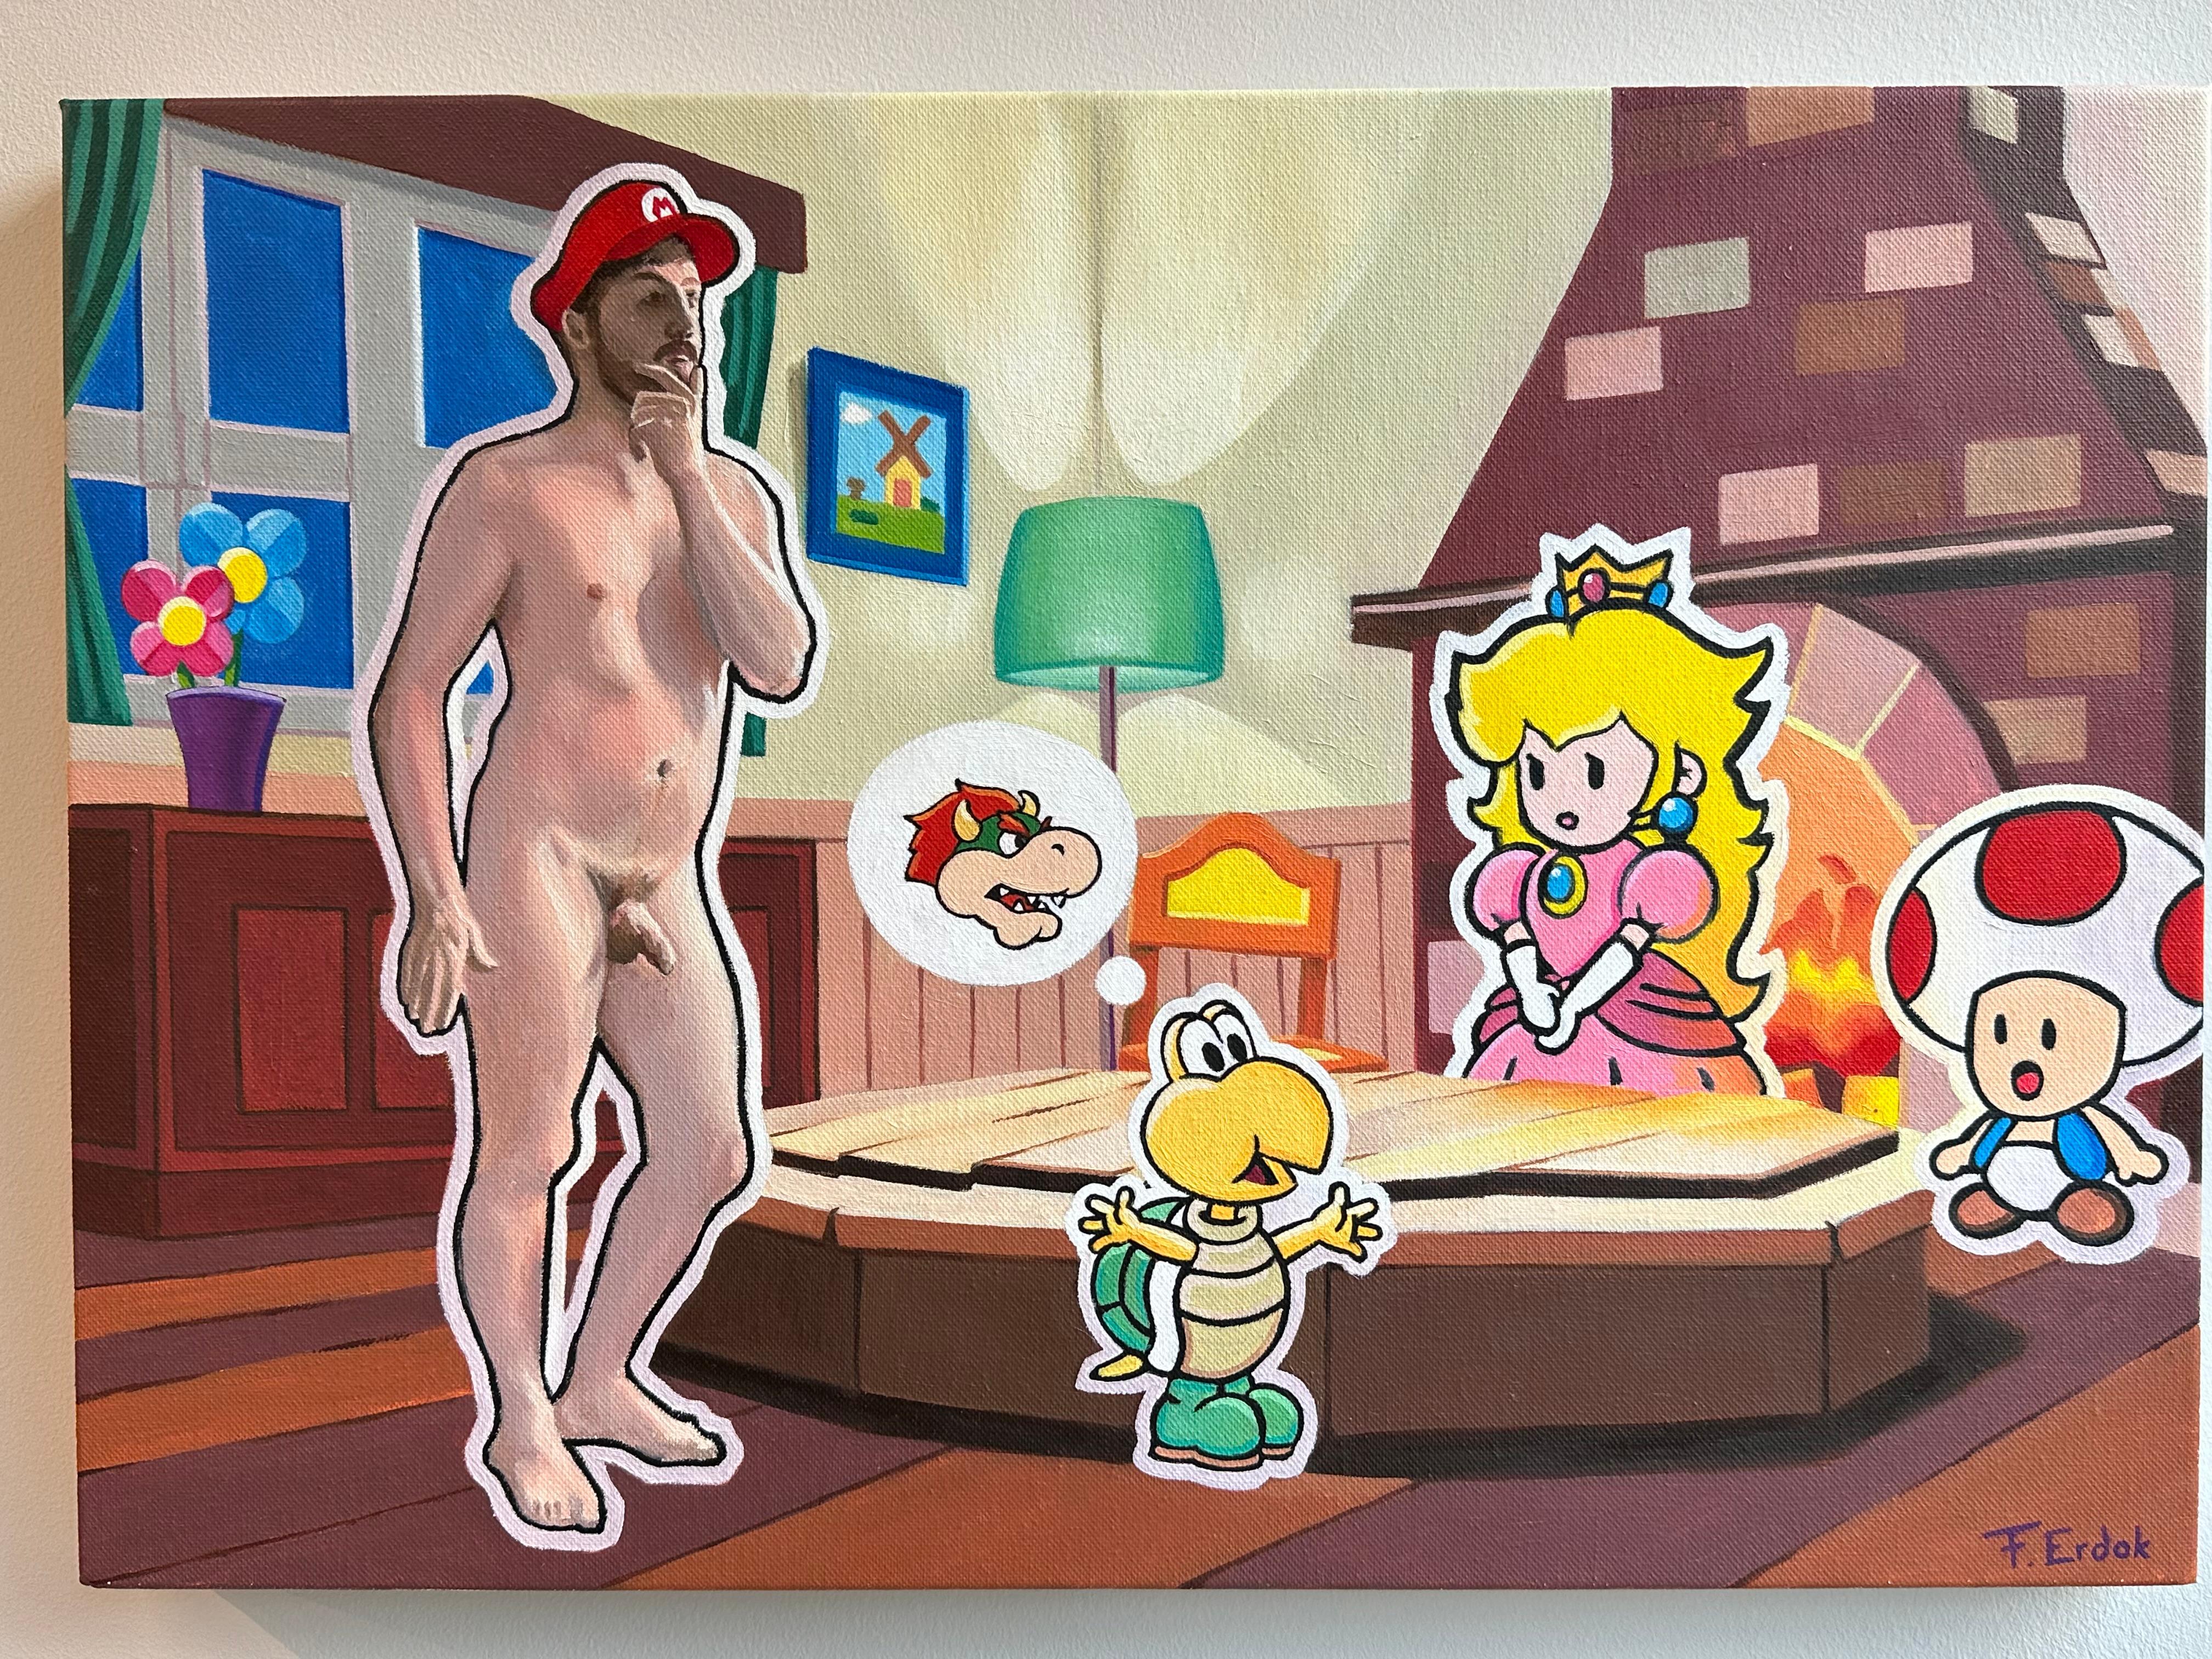 Ferenc Erdok
Paper Prologue
35 x 50 cm 
Oil on canvas

A unique work where a classical theme as a male nude and todays game world come together.

As a young boy Ferenc Erdok (1988) already enjoyed drawing cartoons and video game characters. In high